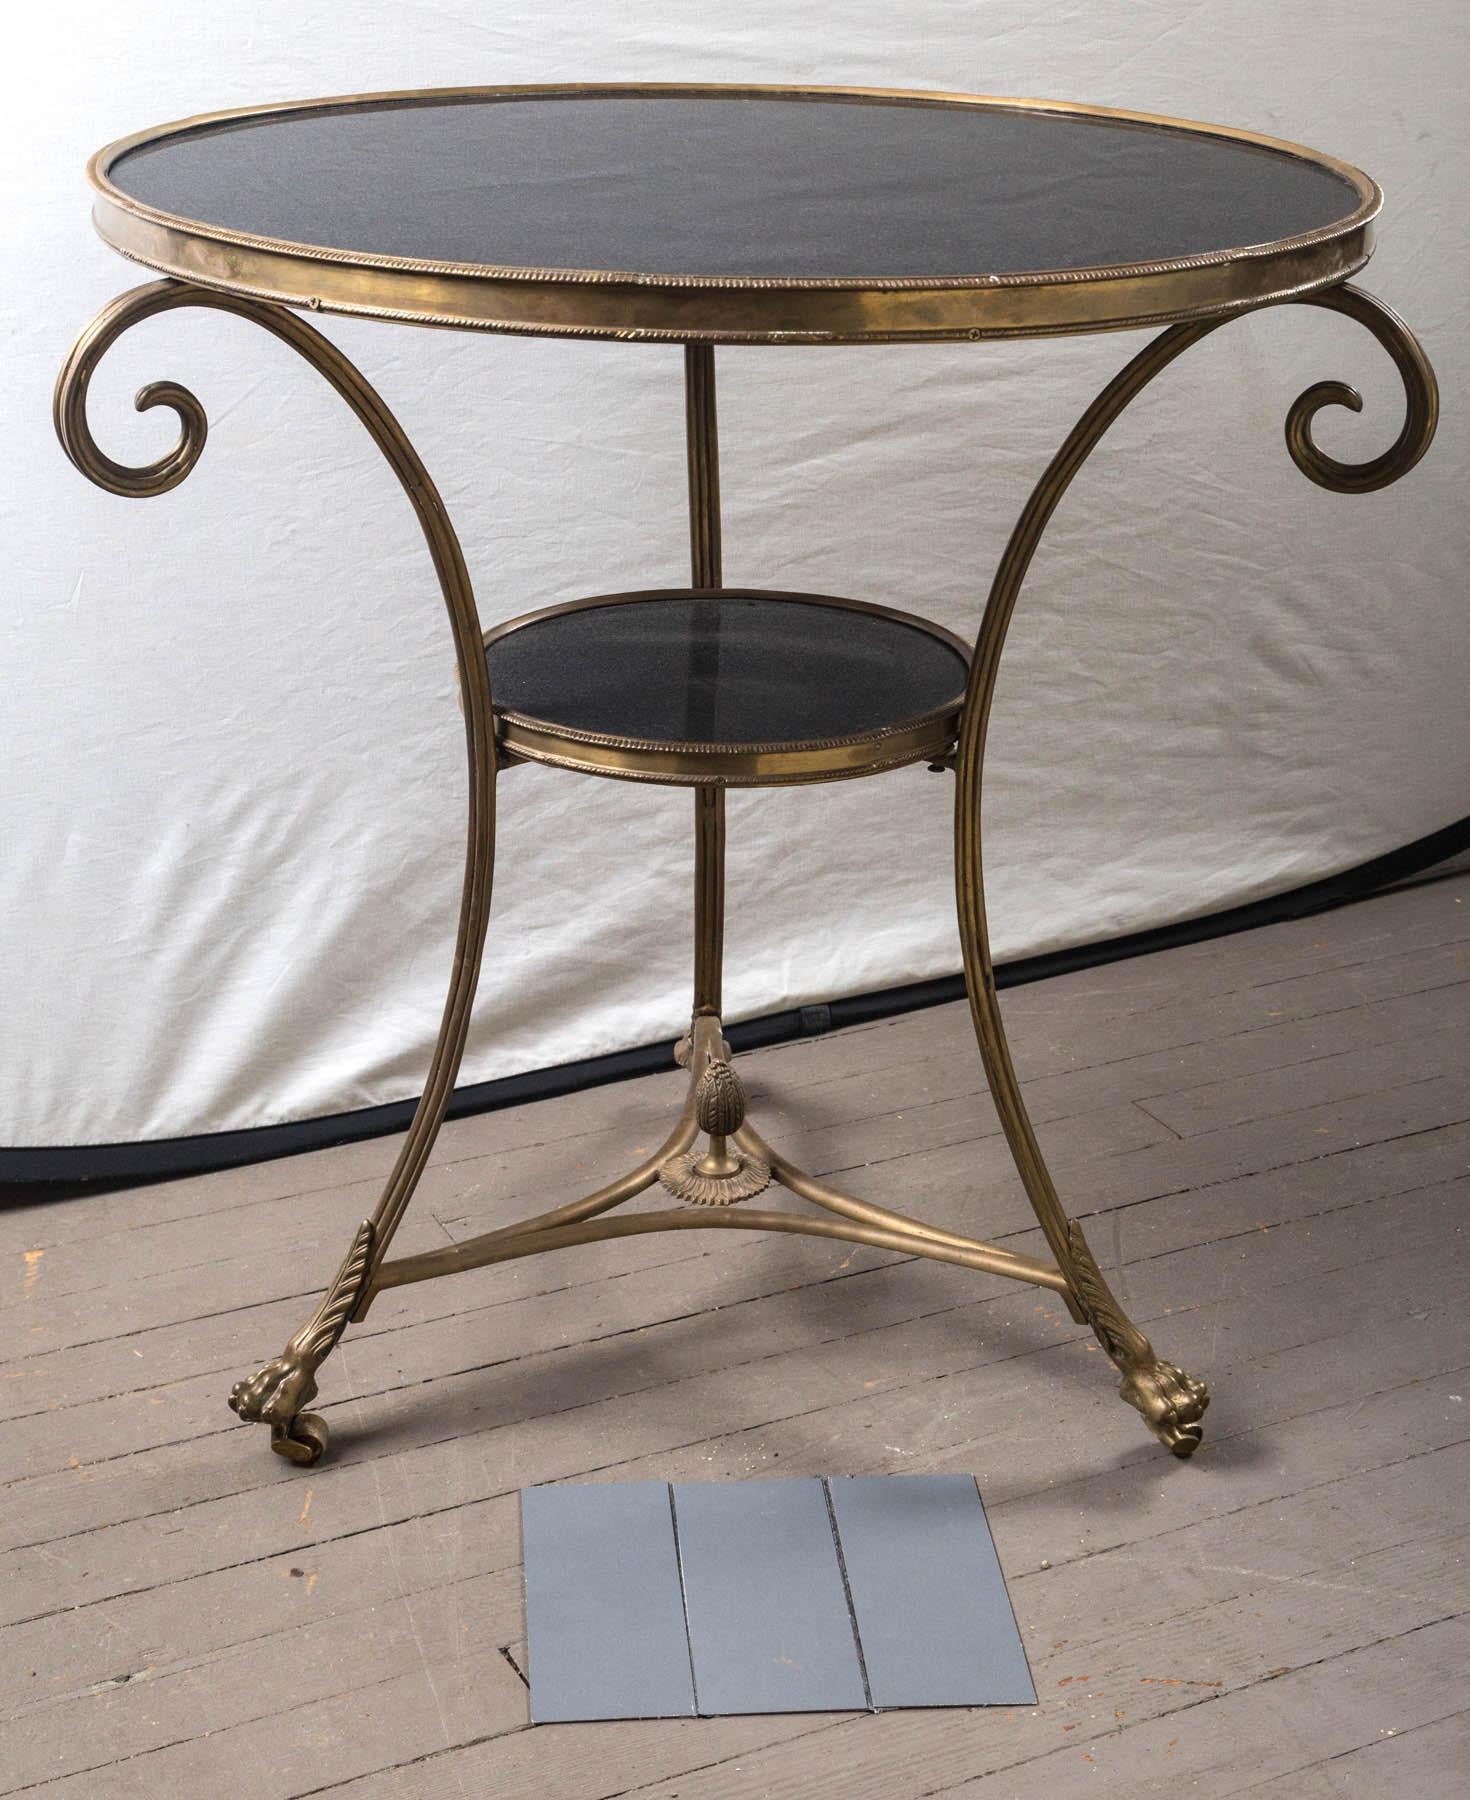 Made of solid brass with a black marble top and lower marble round, this table is in the Directoire style.
Gadrooned edge, dramatic scrolling legs, tripartite stretcher topped by an acorn finial. Brass casters below paw feet.